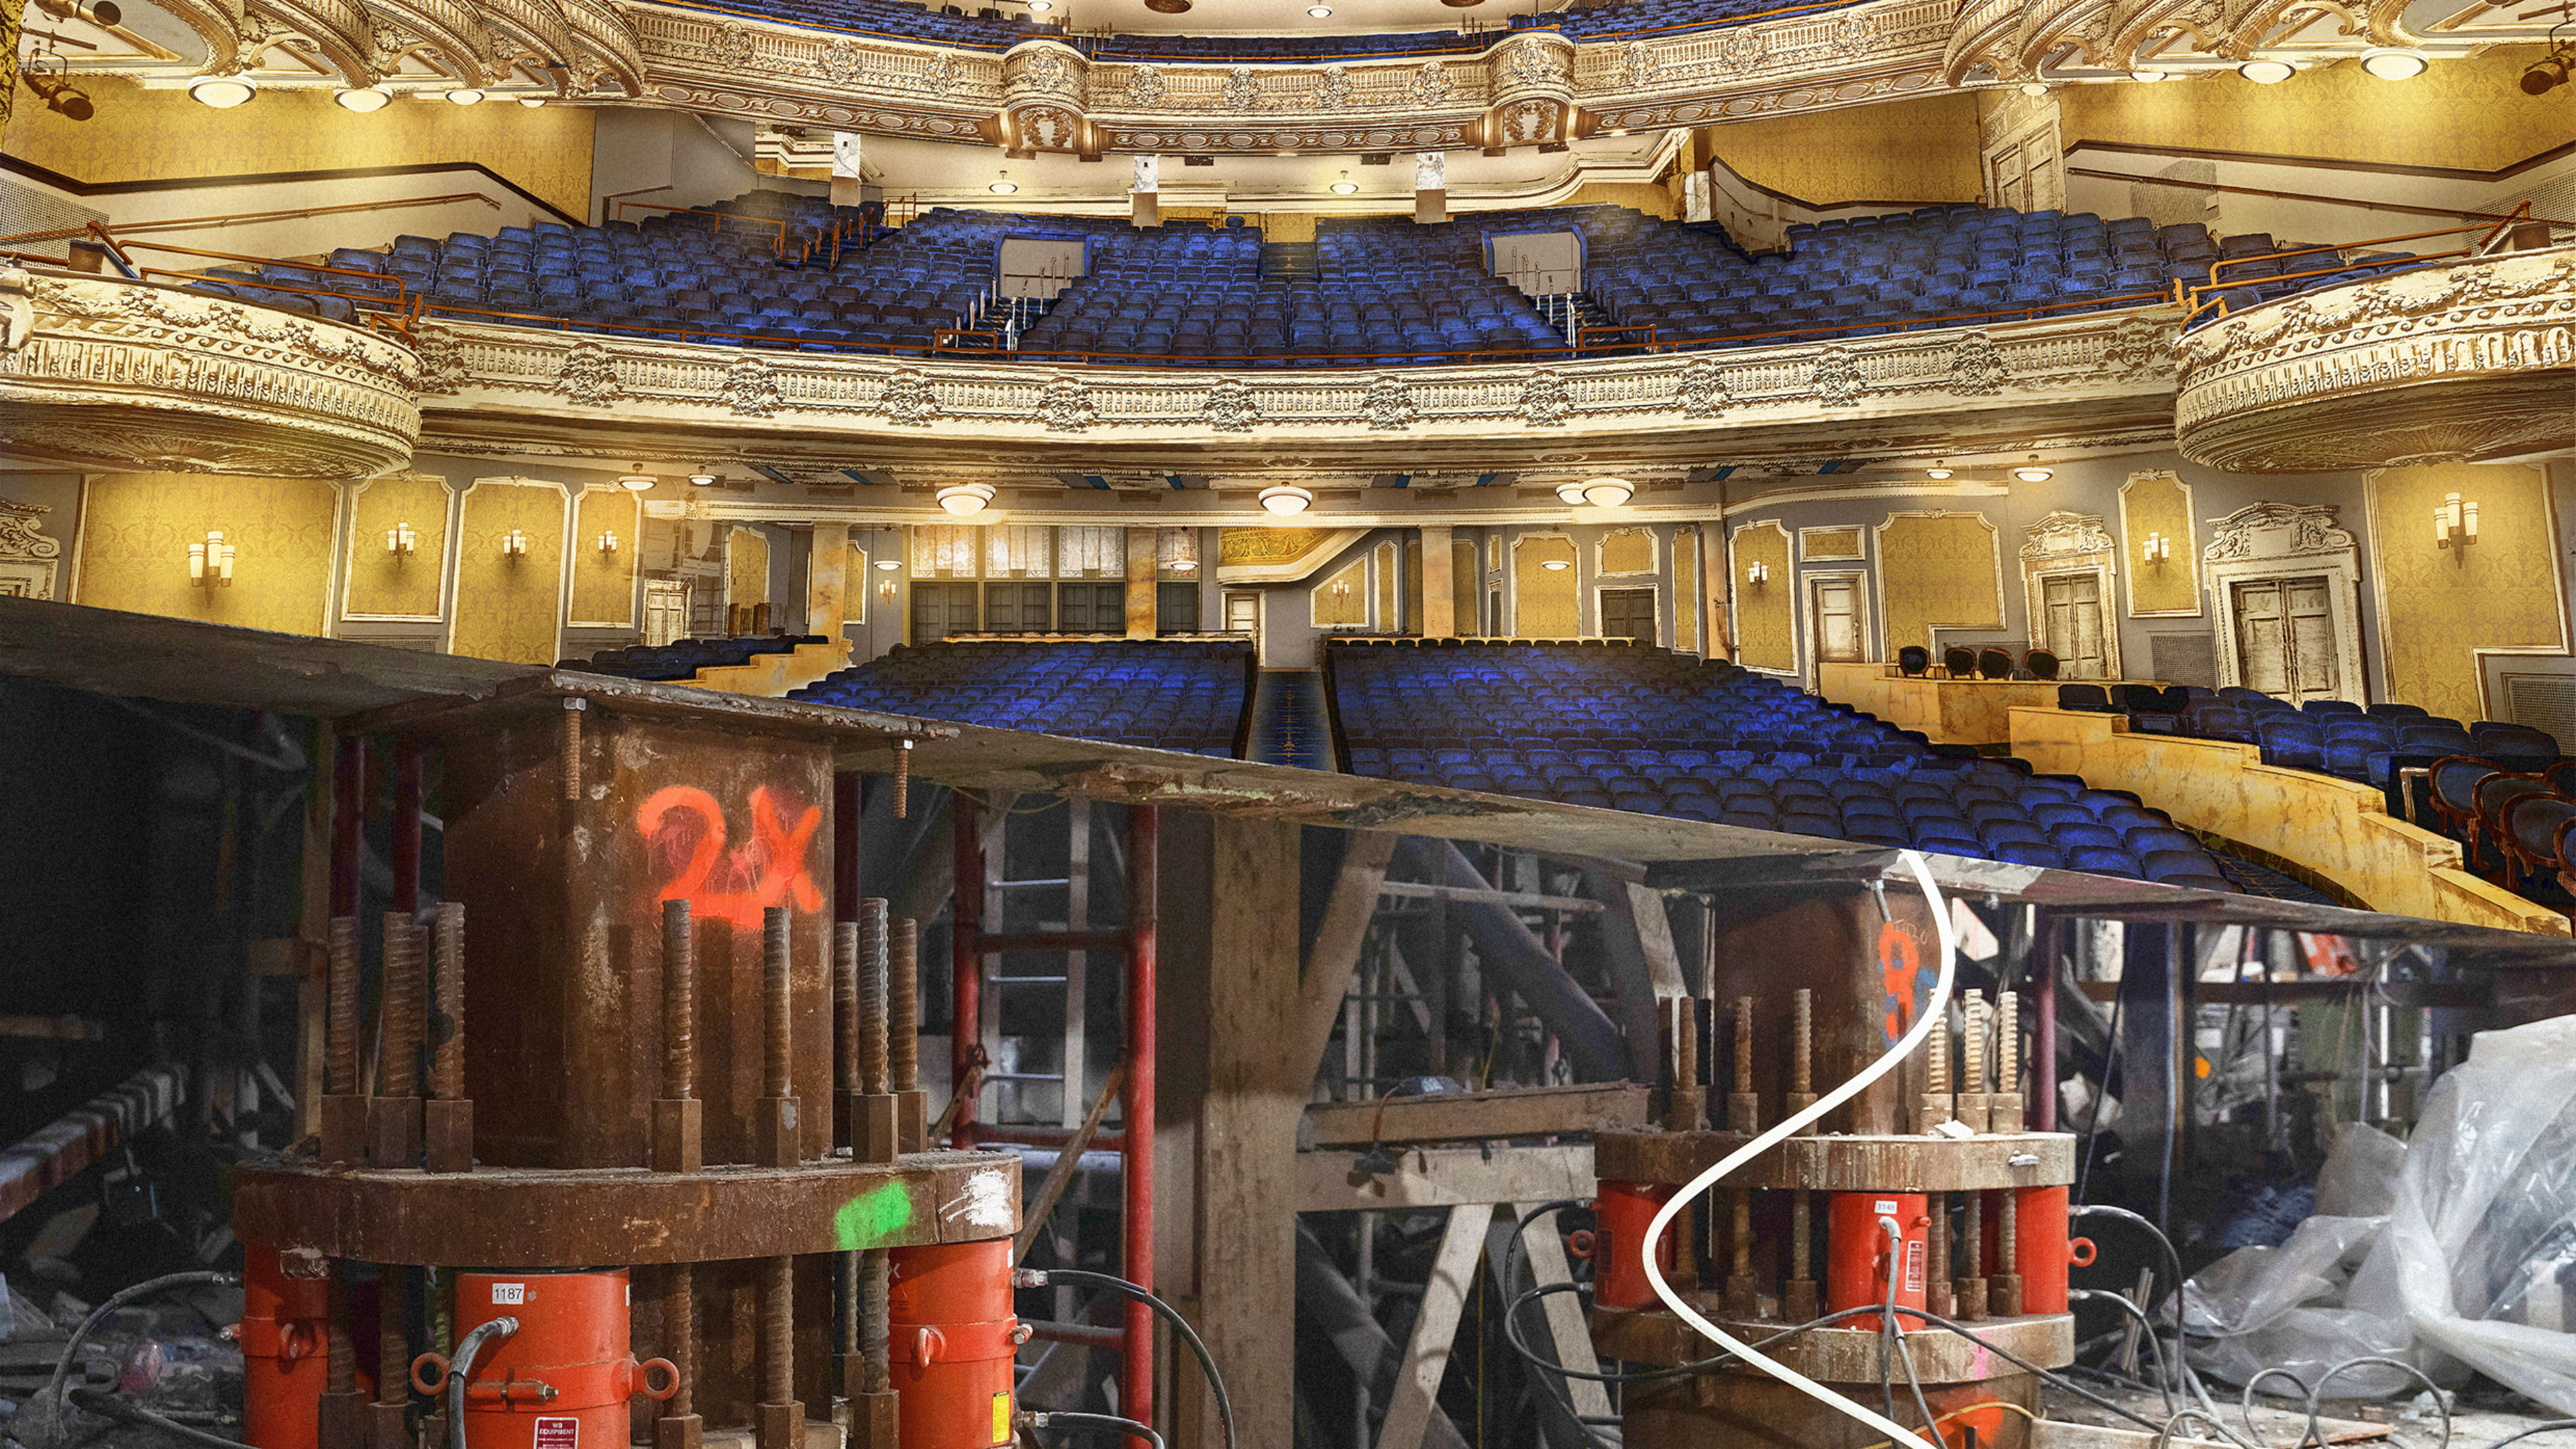 Why New York’s iconic Palace Theatre is being raised 30 feet off the ground